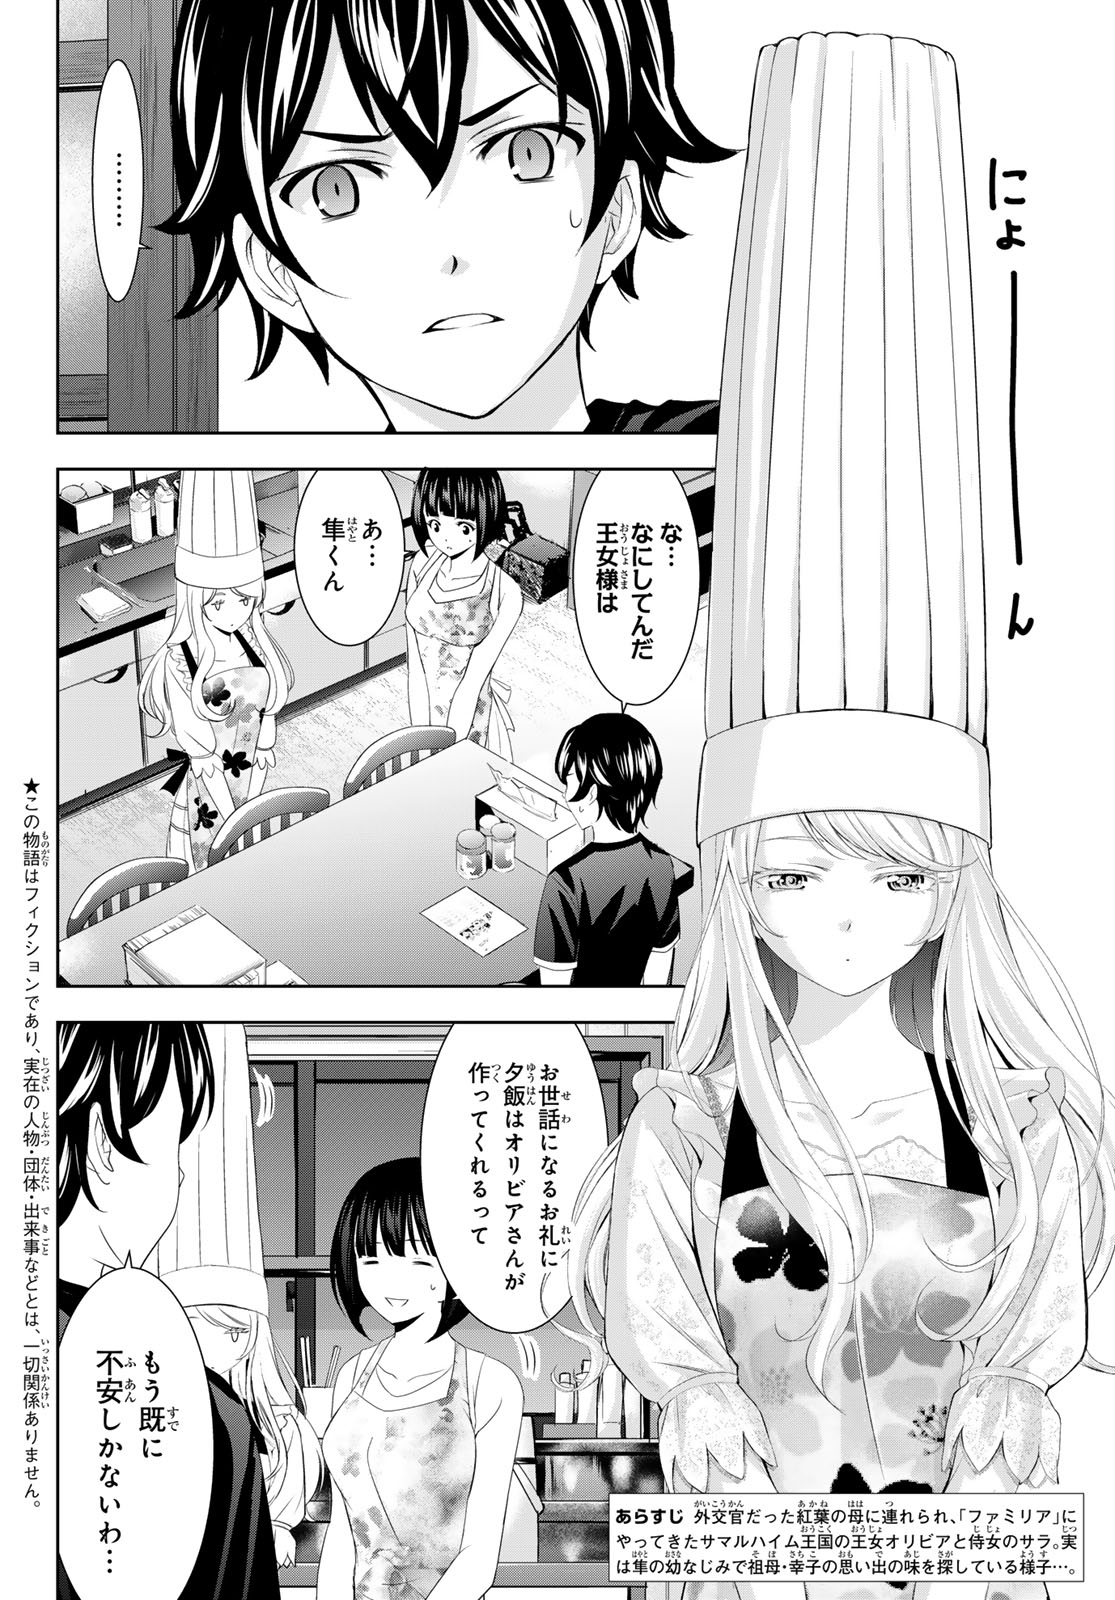 Megami no Cafe Terace - Chapter 138 - Page 2